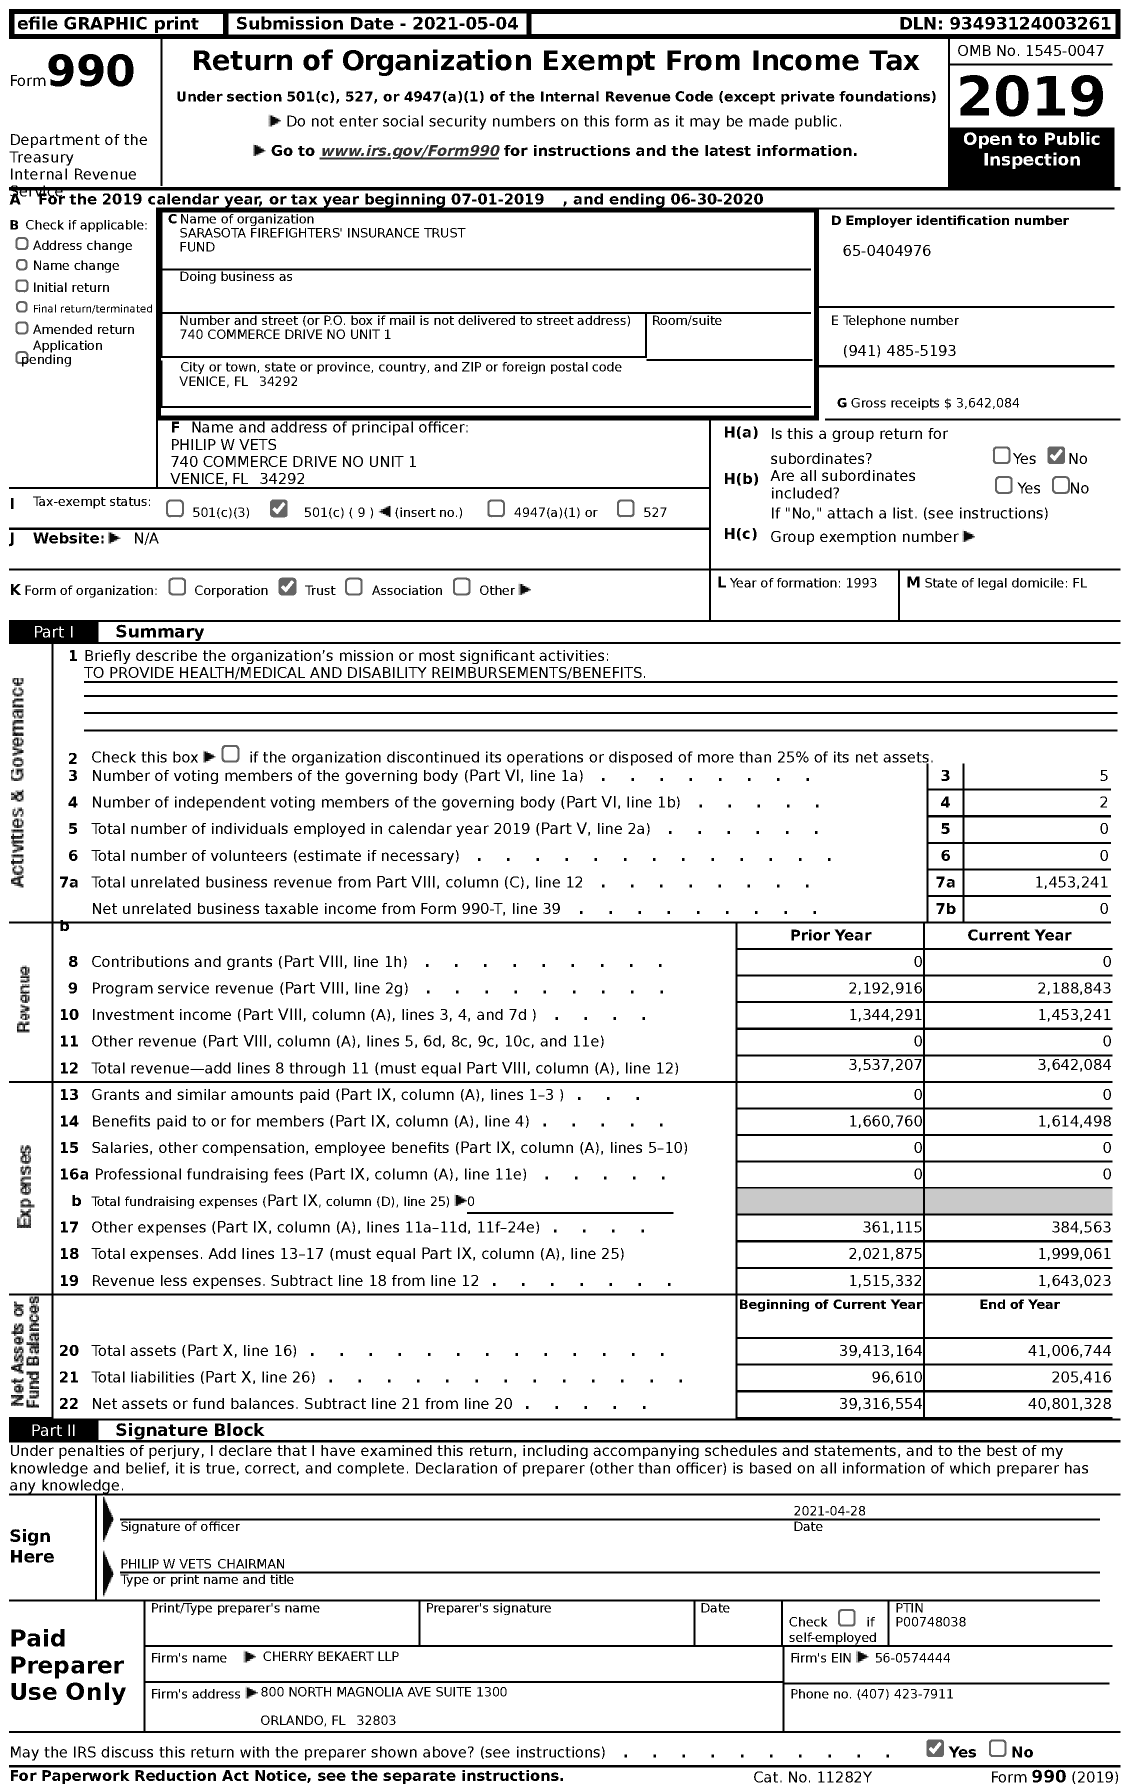 Image of first page of 2019 Form 990 for Sarasota Firefighters' Insurance Trust Fund